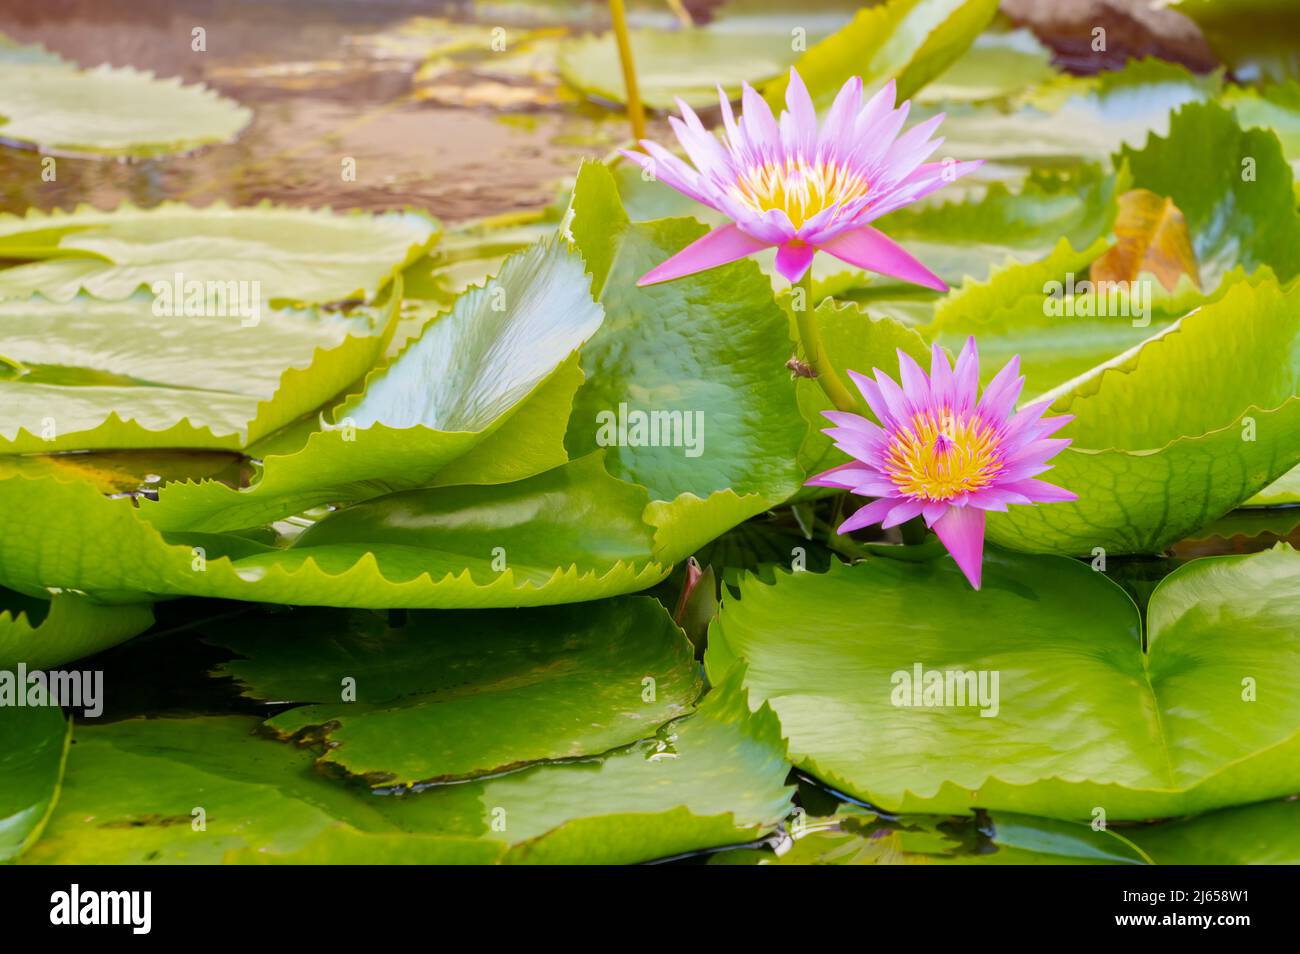 Pink-purple lotus and leaves in water Stock Photo